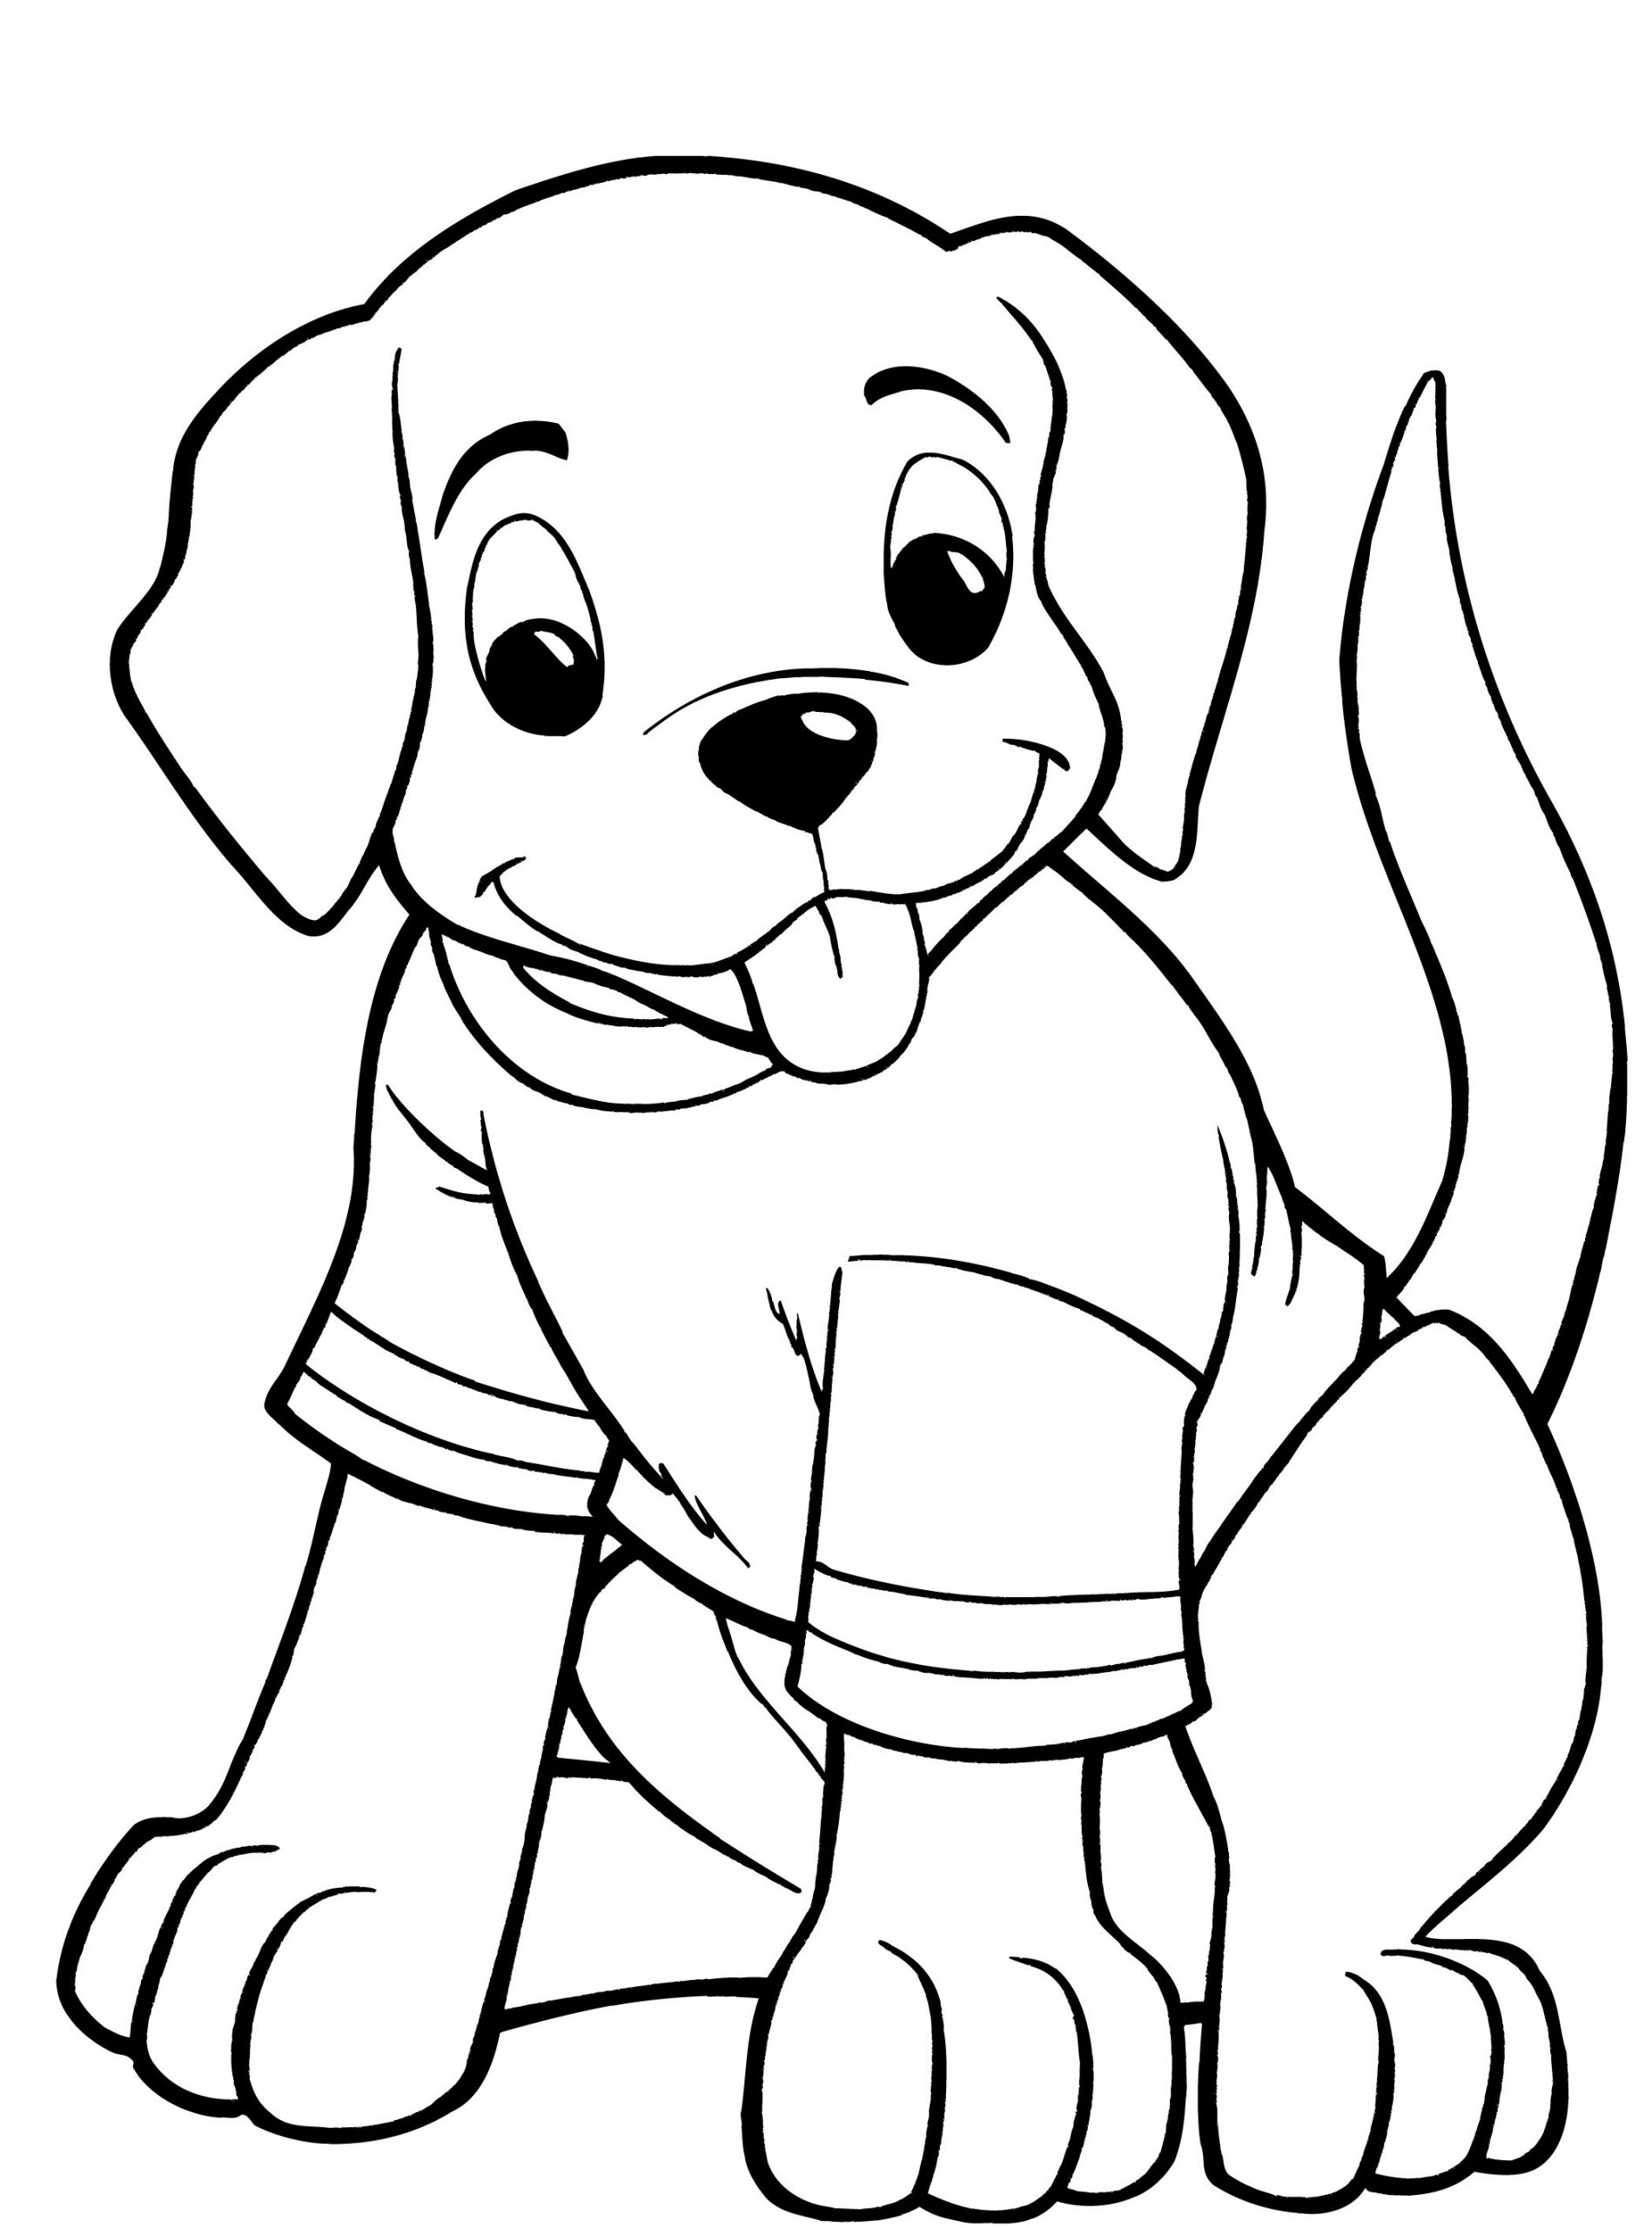 Puppy Wearing T Shirt Coloring Page - Free Printable Coloring Pages for Kids